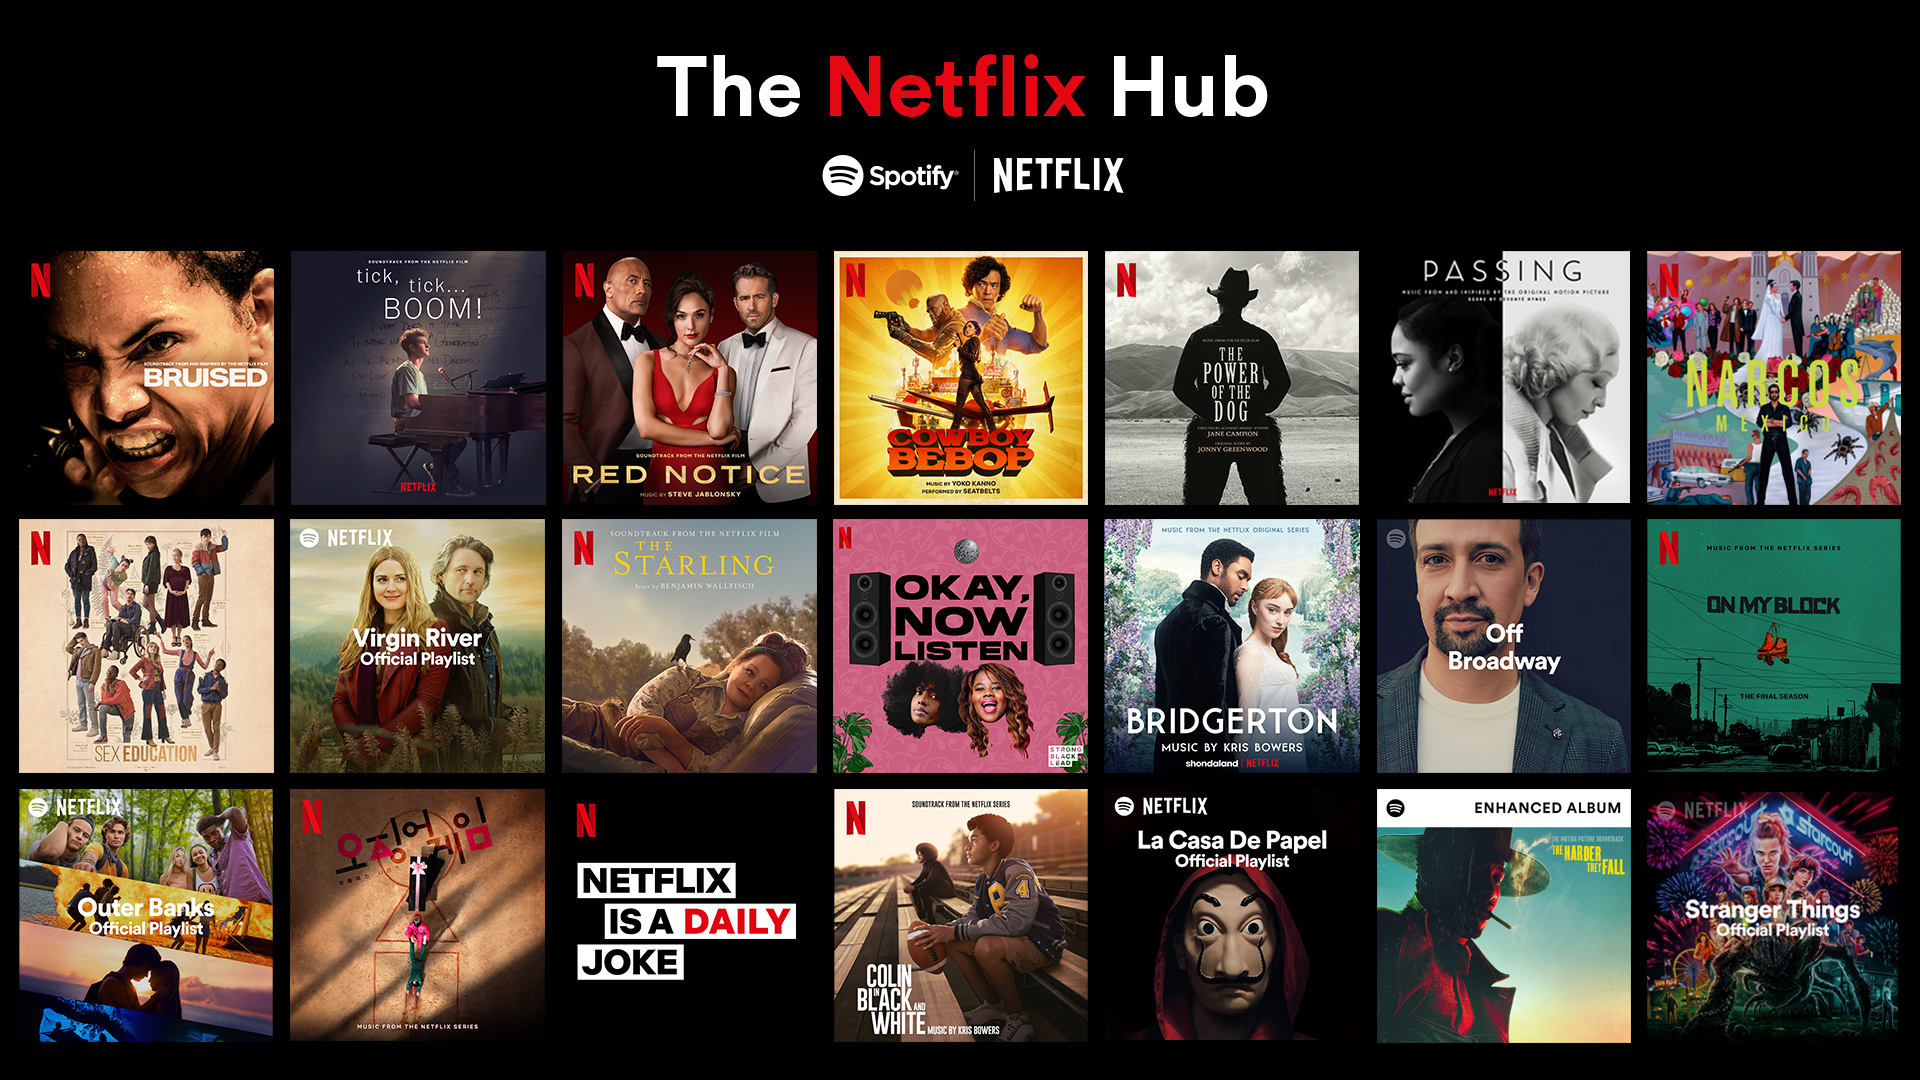 Spotify partner with Netflix to launch a hub full of playlists, soundtracks and podcasts around your favourite series and films